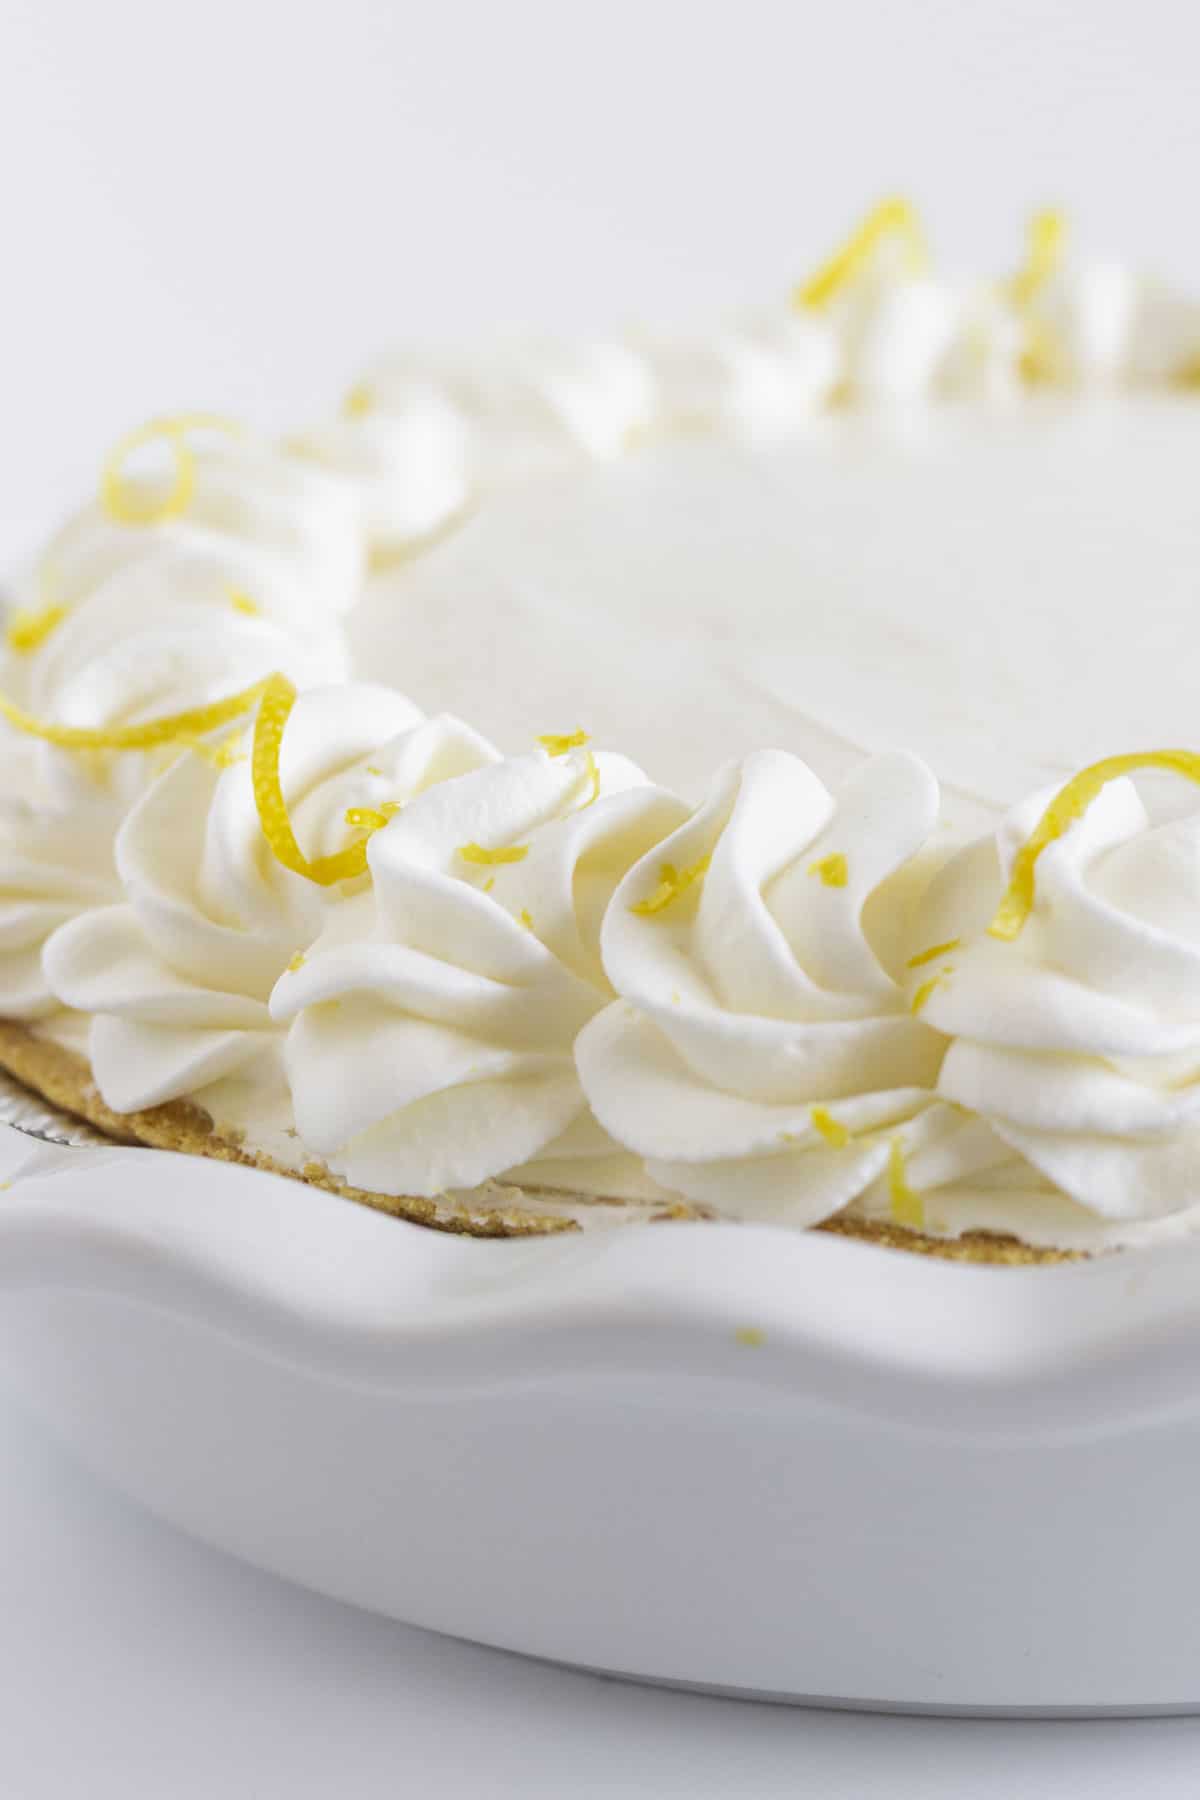 A no bake lemon cheesecake with a whipped cream border and lemon zest.